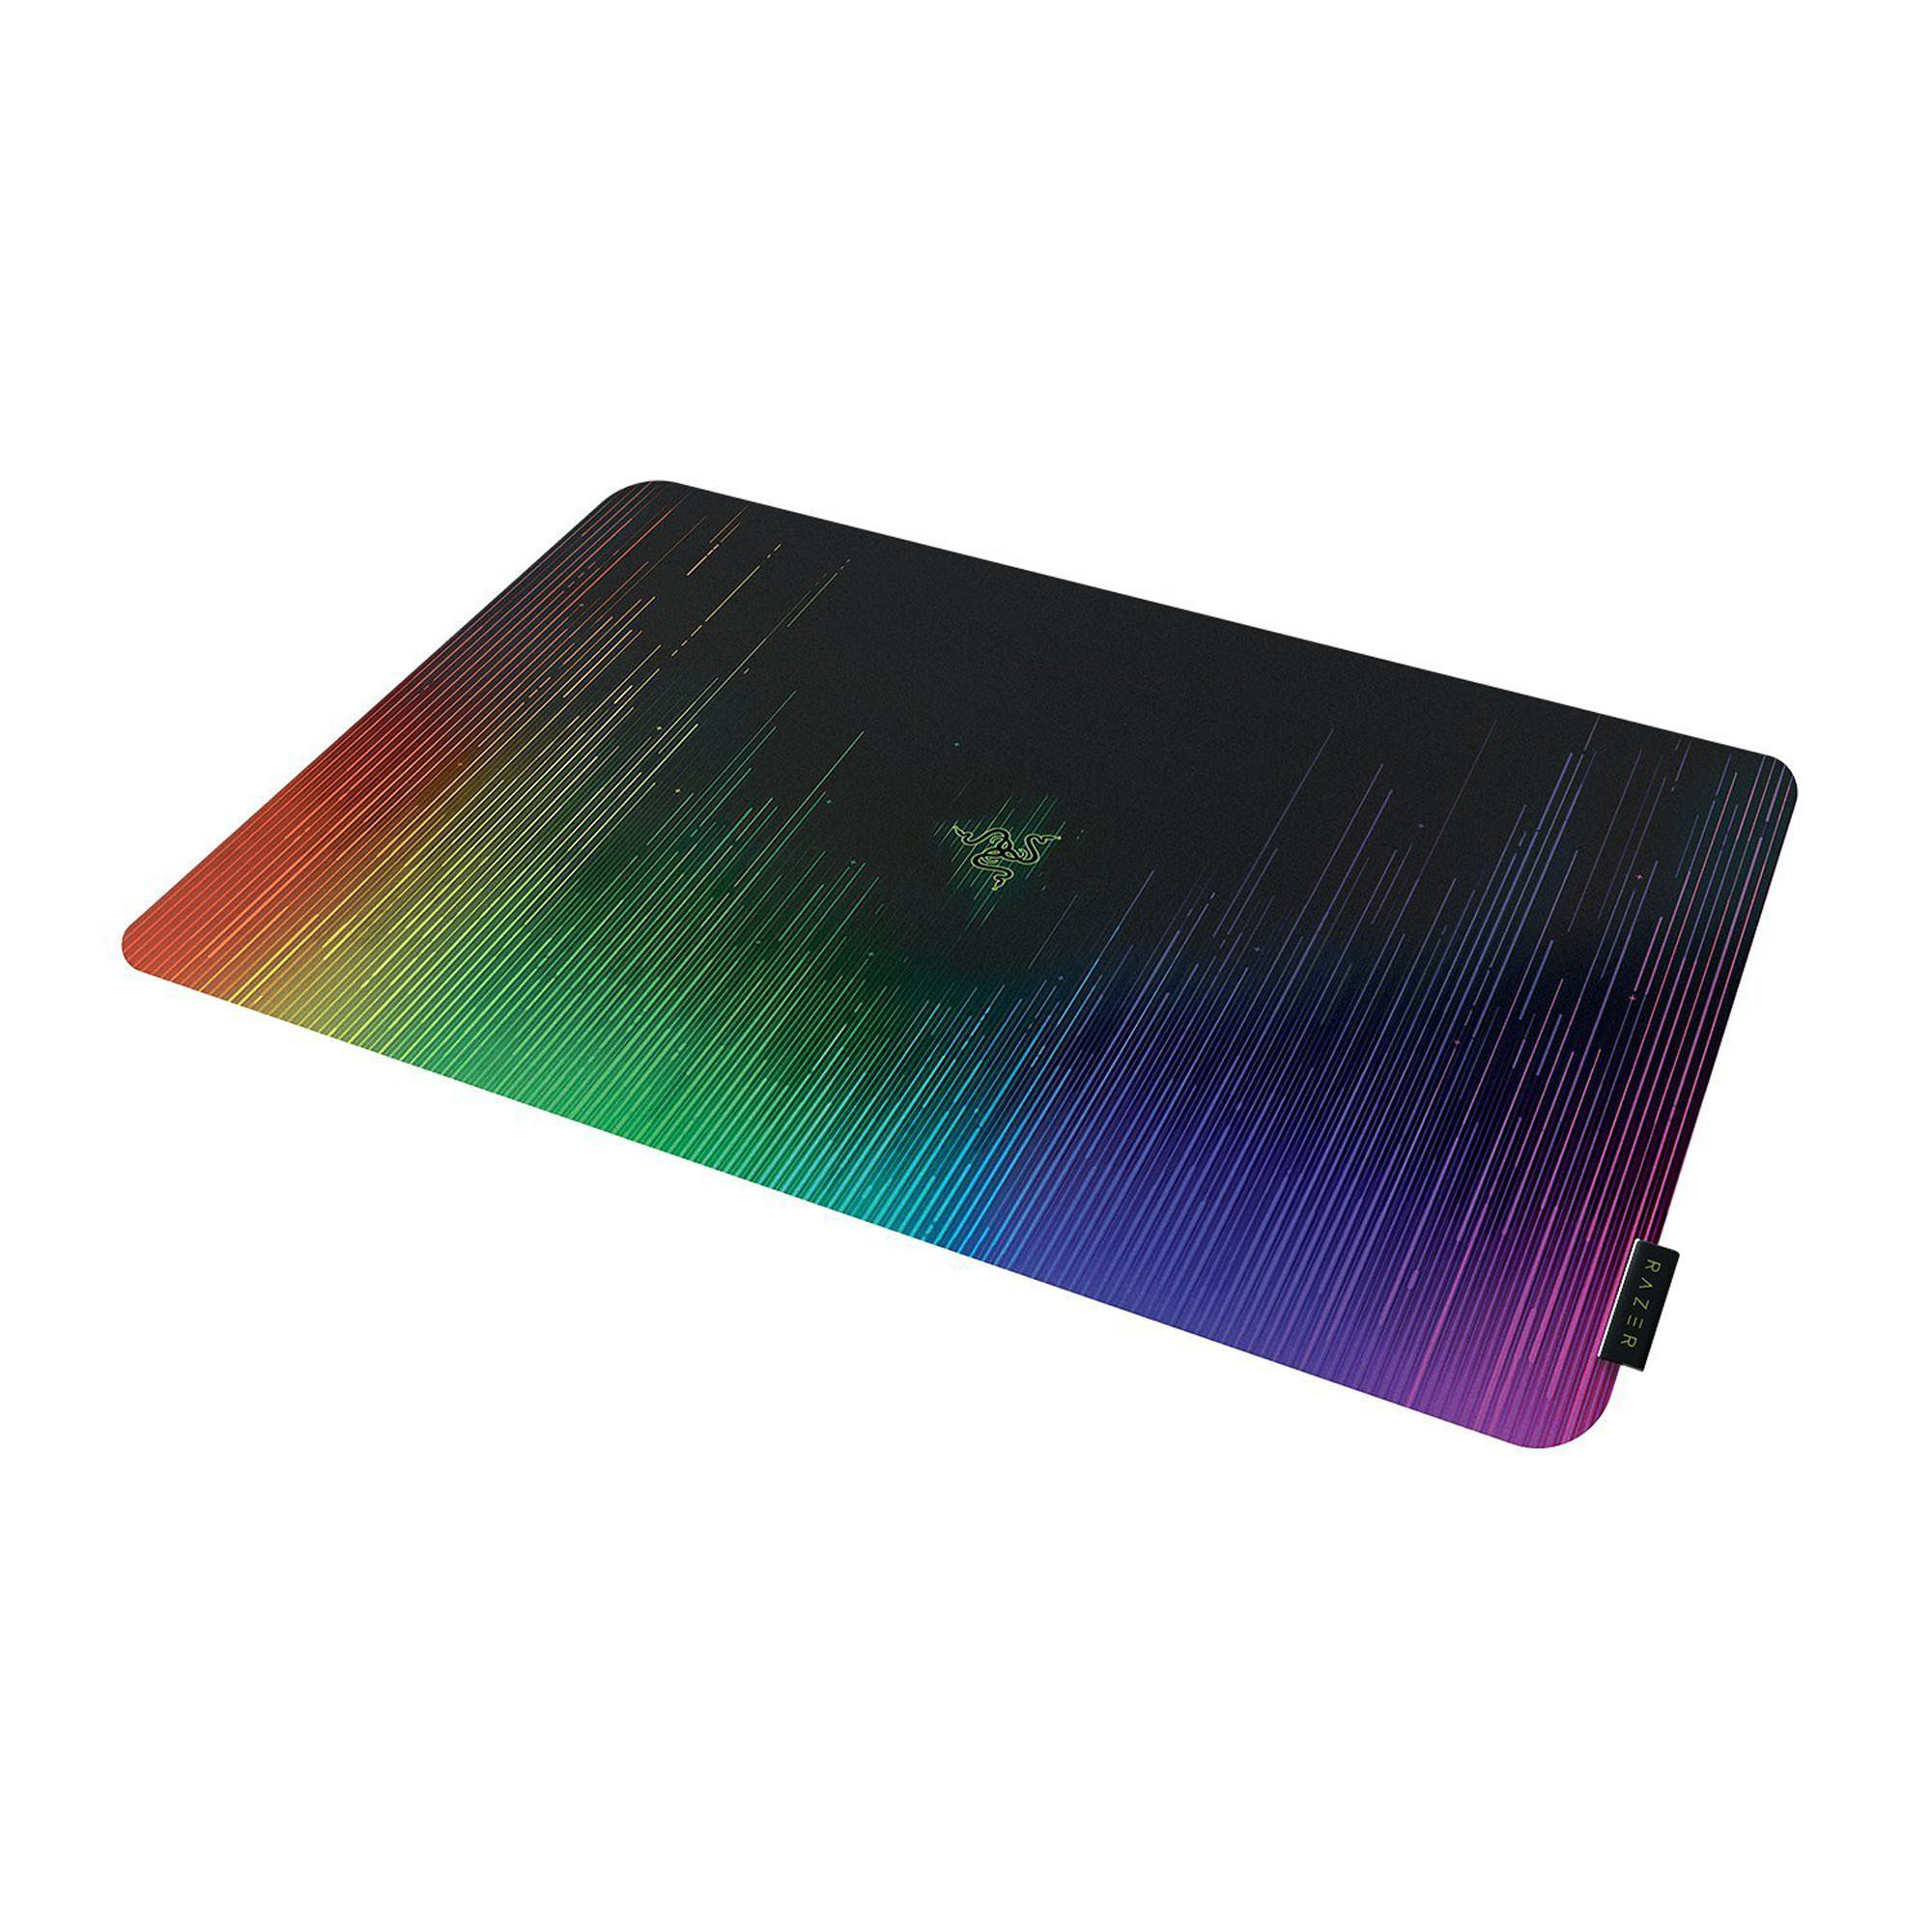 Razer Sphex V2 Ultra-Thin Form Factor - Optimized Gaming Surface - Polycarbonate Finish - Gaming Mouse Mat - image 1 of 10